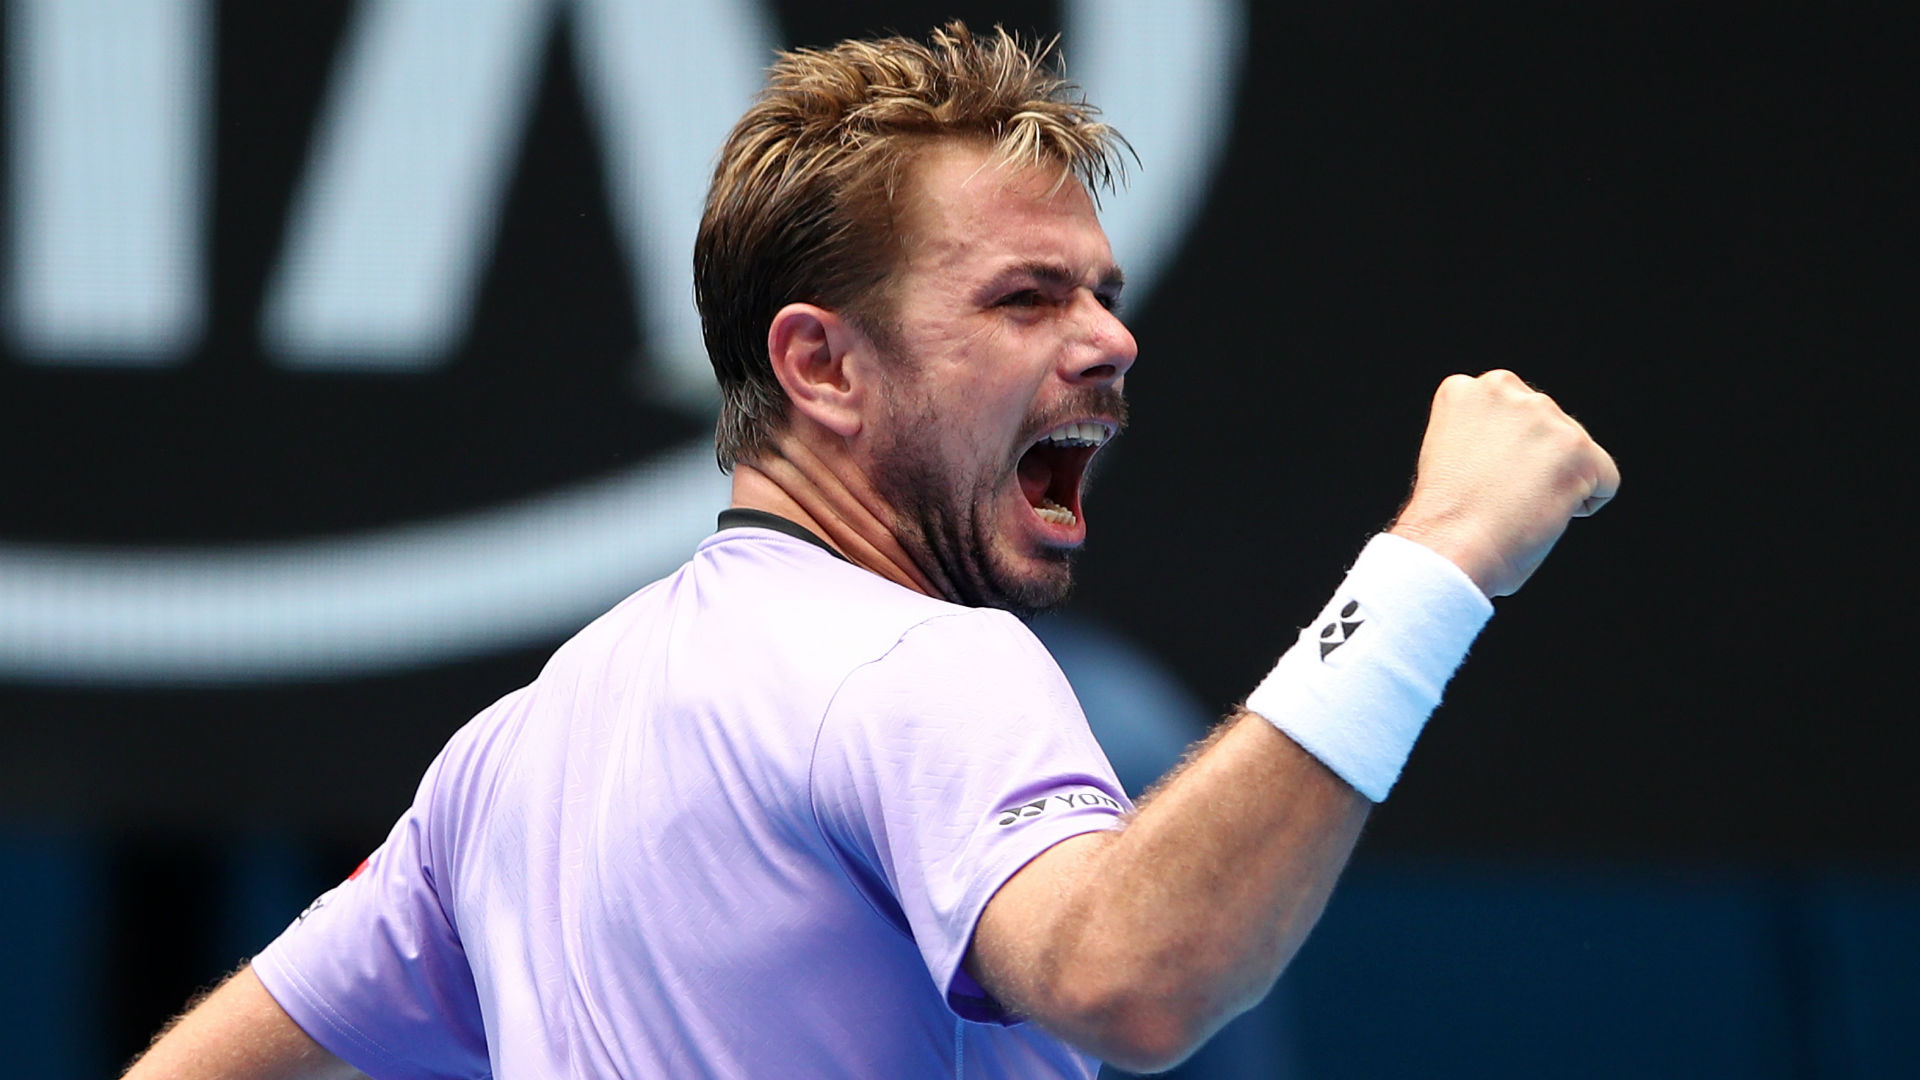 Having lost to Milos Raonic at the Australian Open, Stan Wawrinka overcame the Canadian in Rotterdam to reach the quarter-finals.